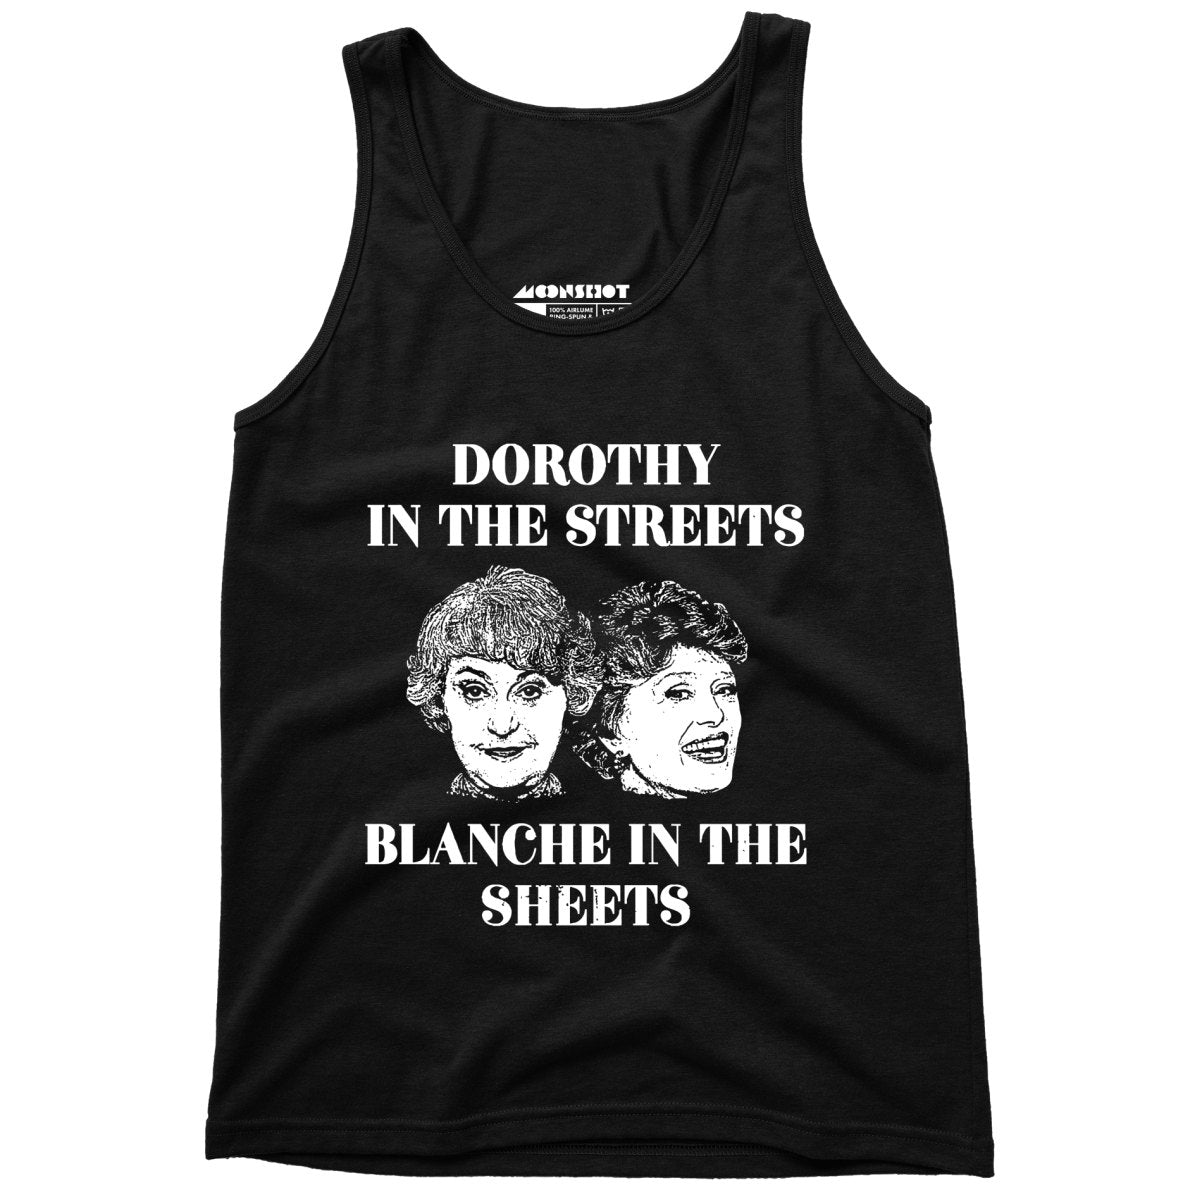 Dorothy in the Streets Blanche in the Sheets - Unisex Tank Top